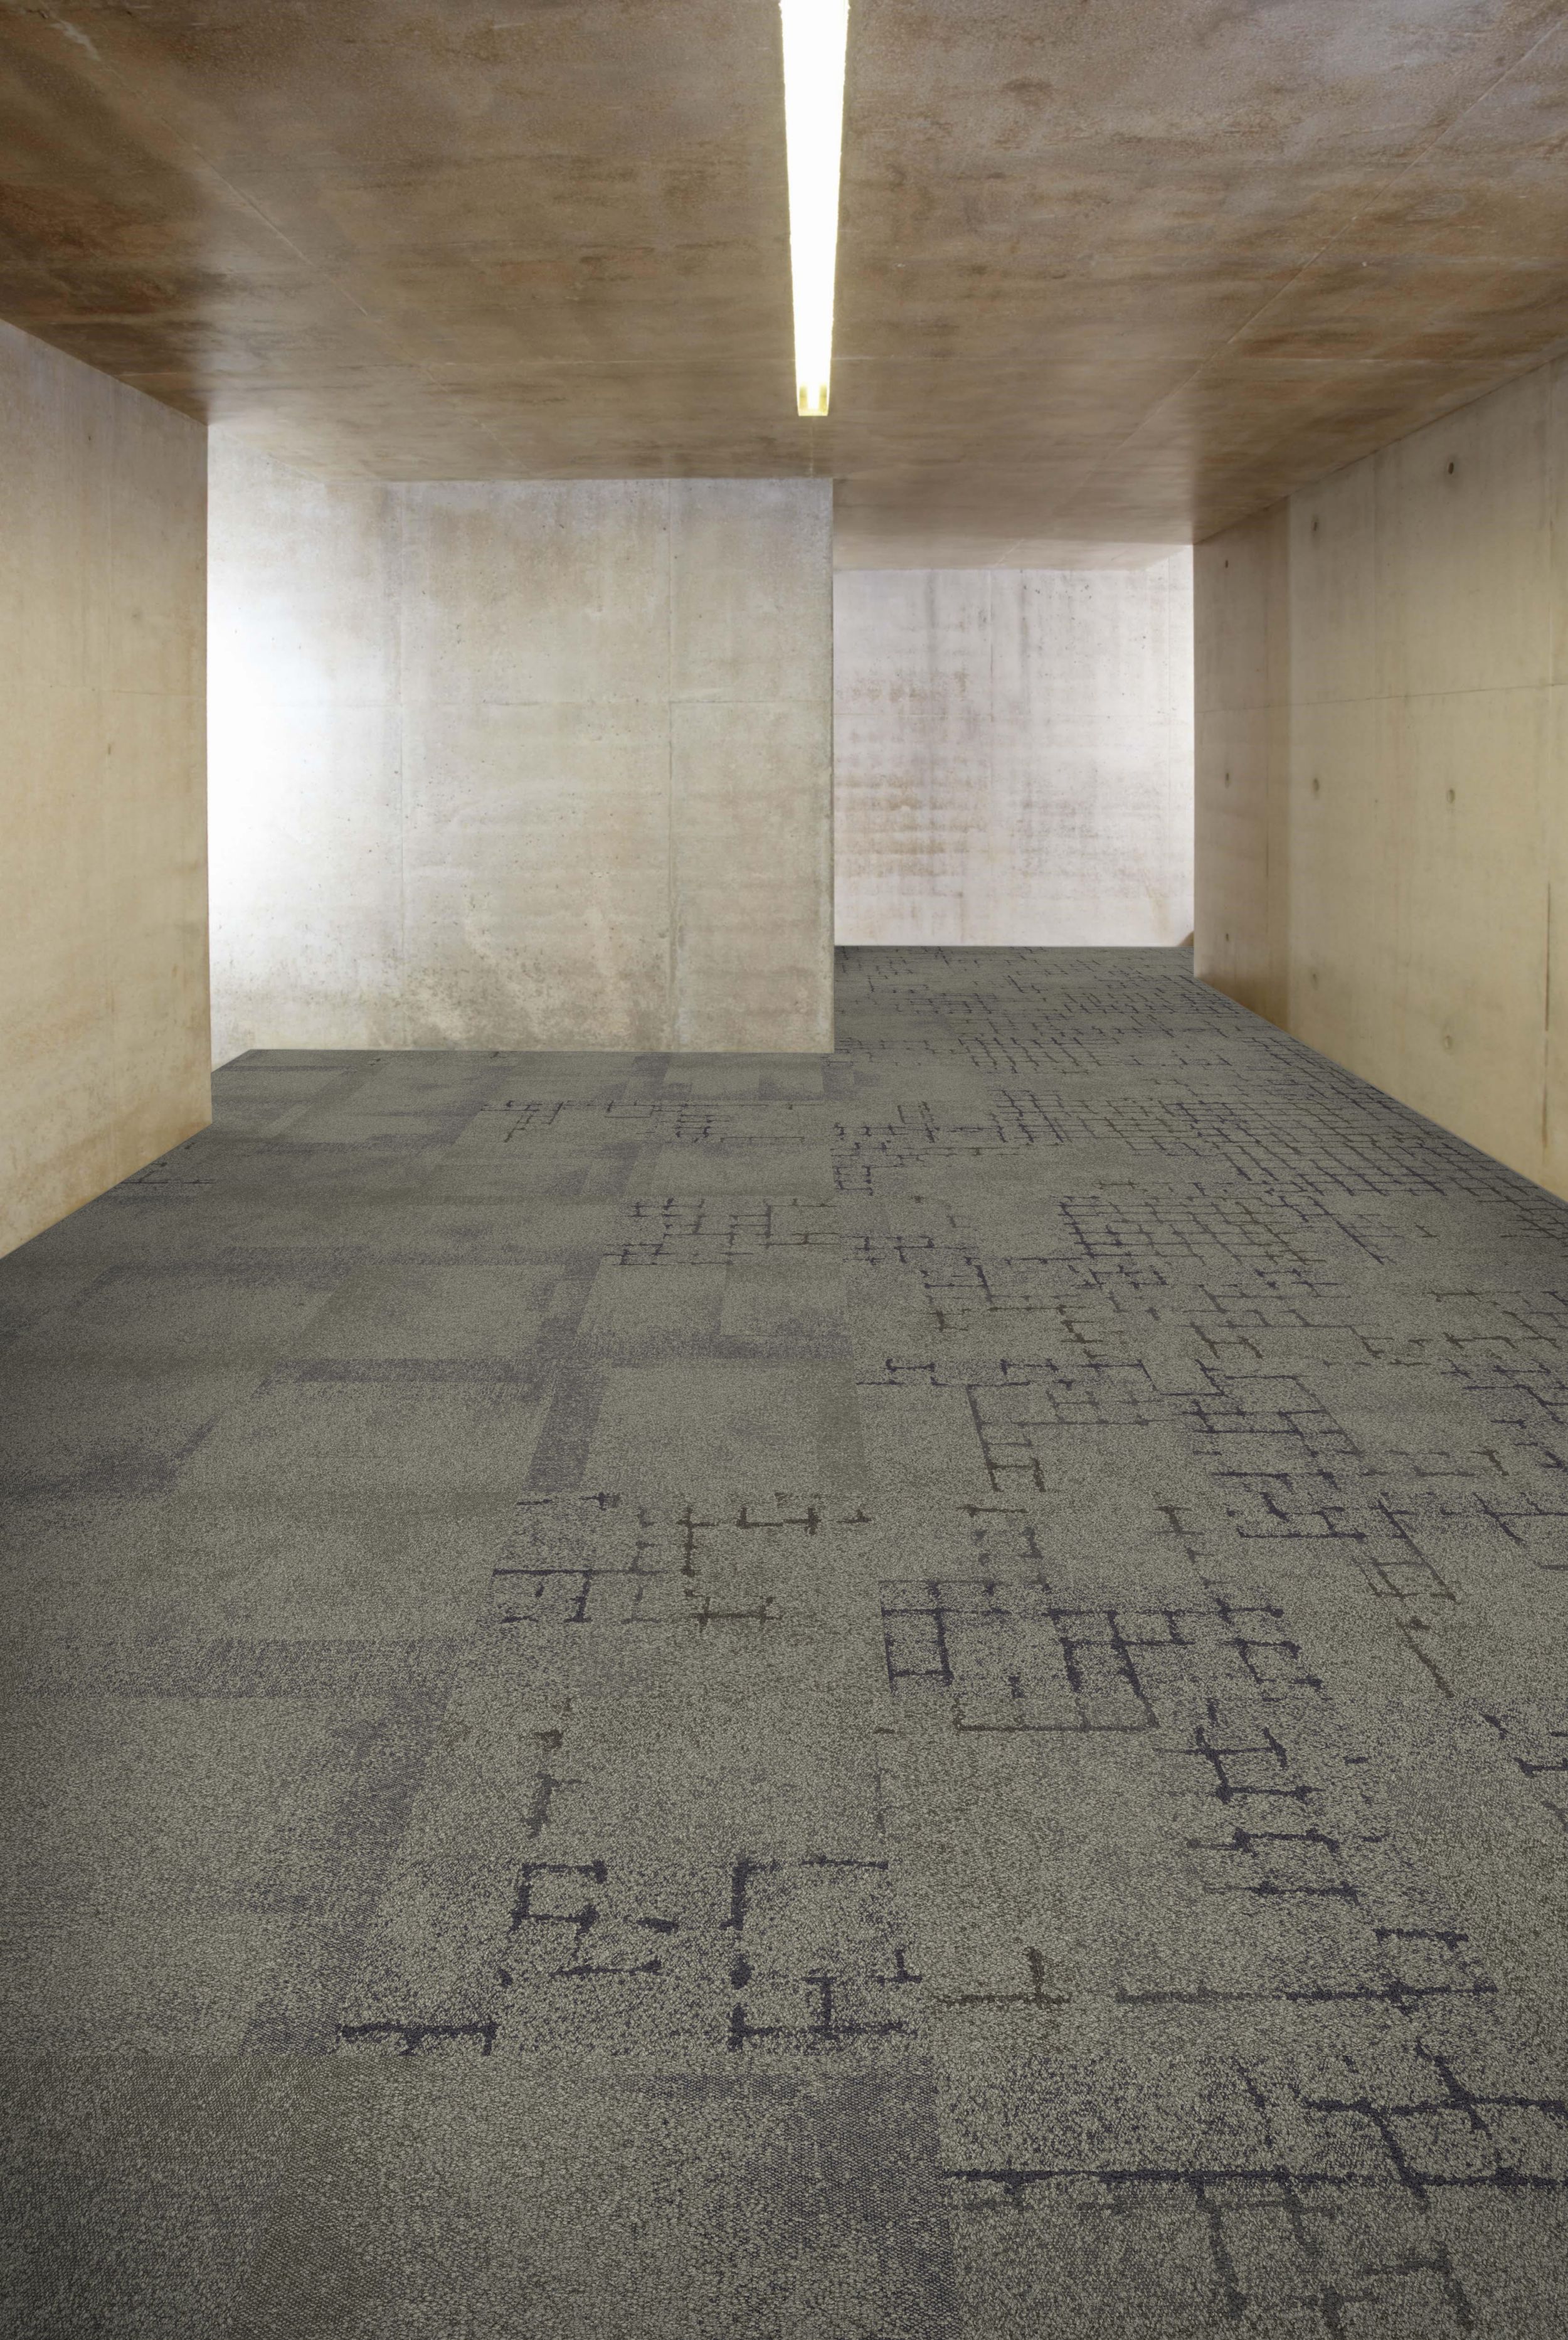 Interface Flagstone, Kerbstone and Sett in Stone carpet tile in corridor with concrete walls and ceiling afbeeldingnummer 5